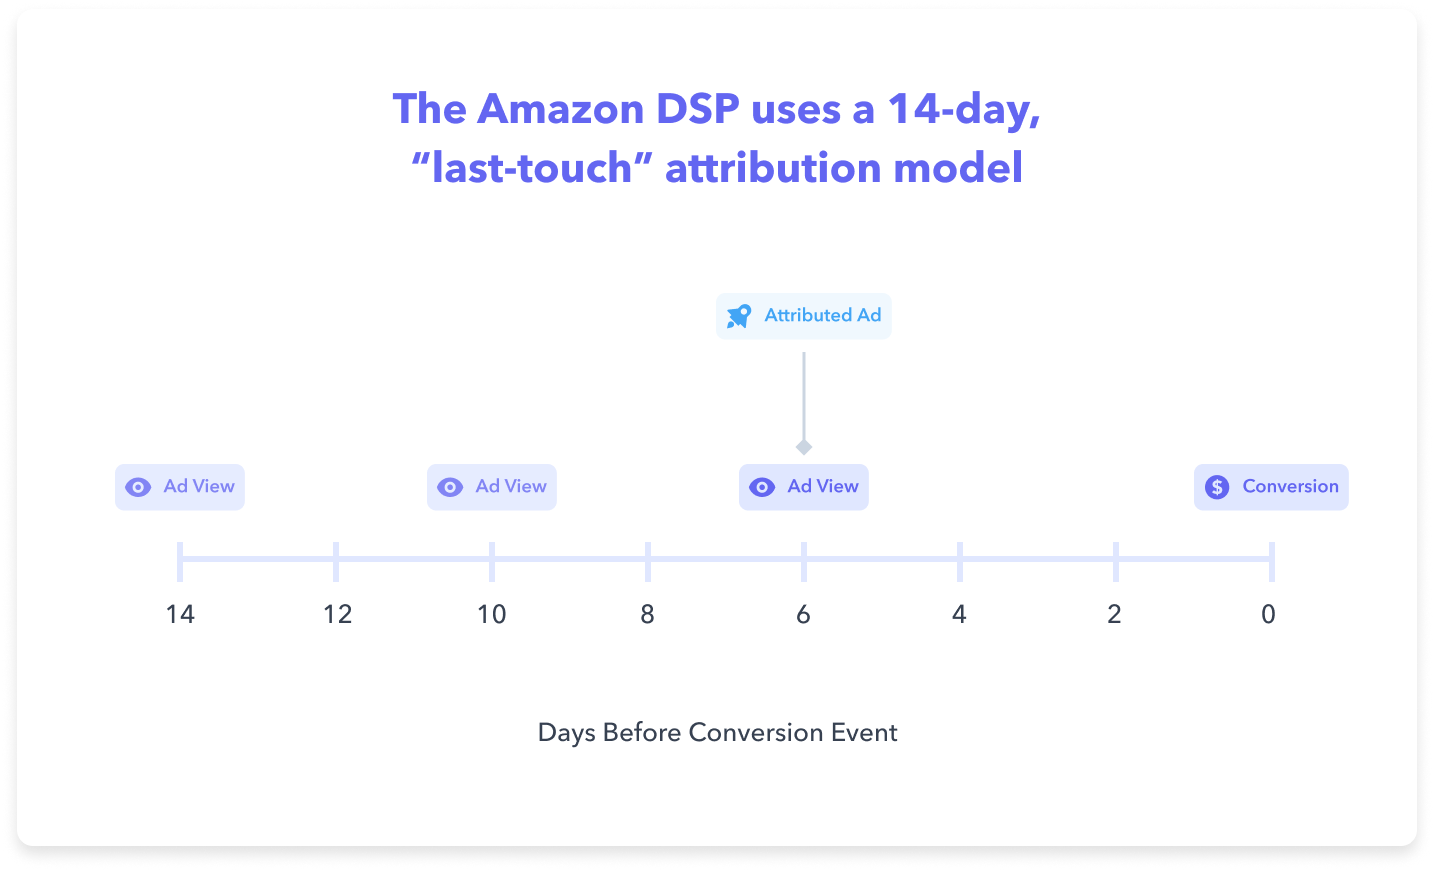 Perpetua The Amazon DSP uses a 14-day, “last-touch” attribution model